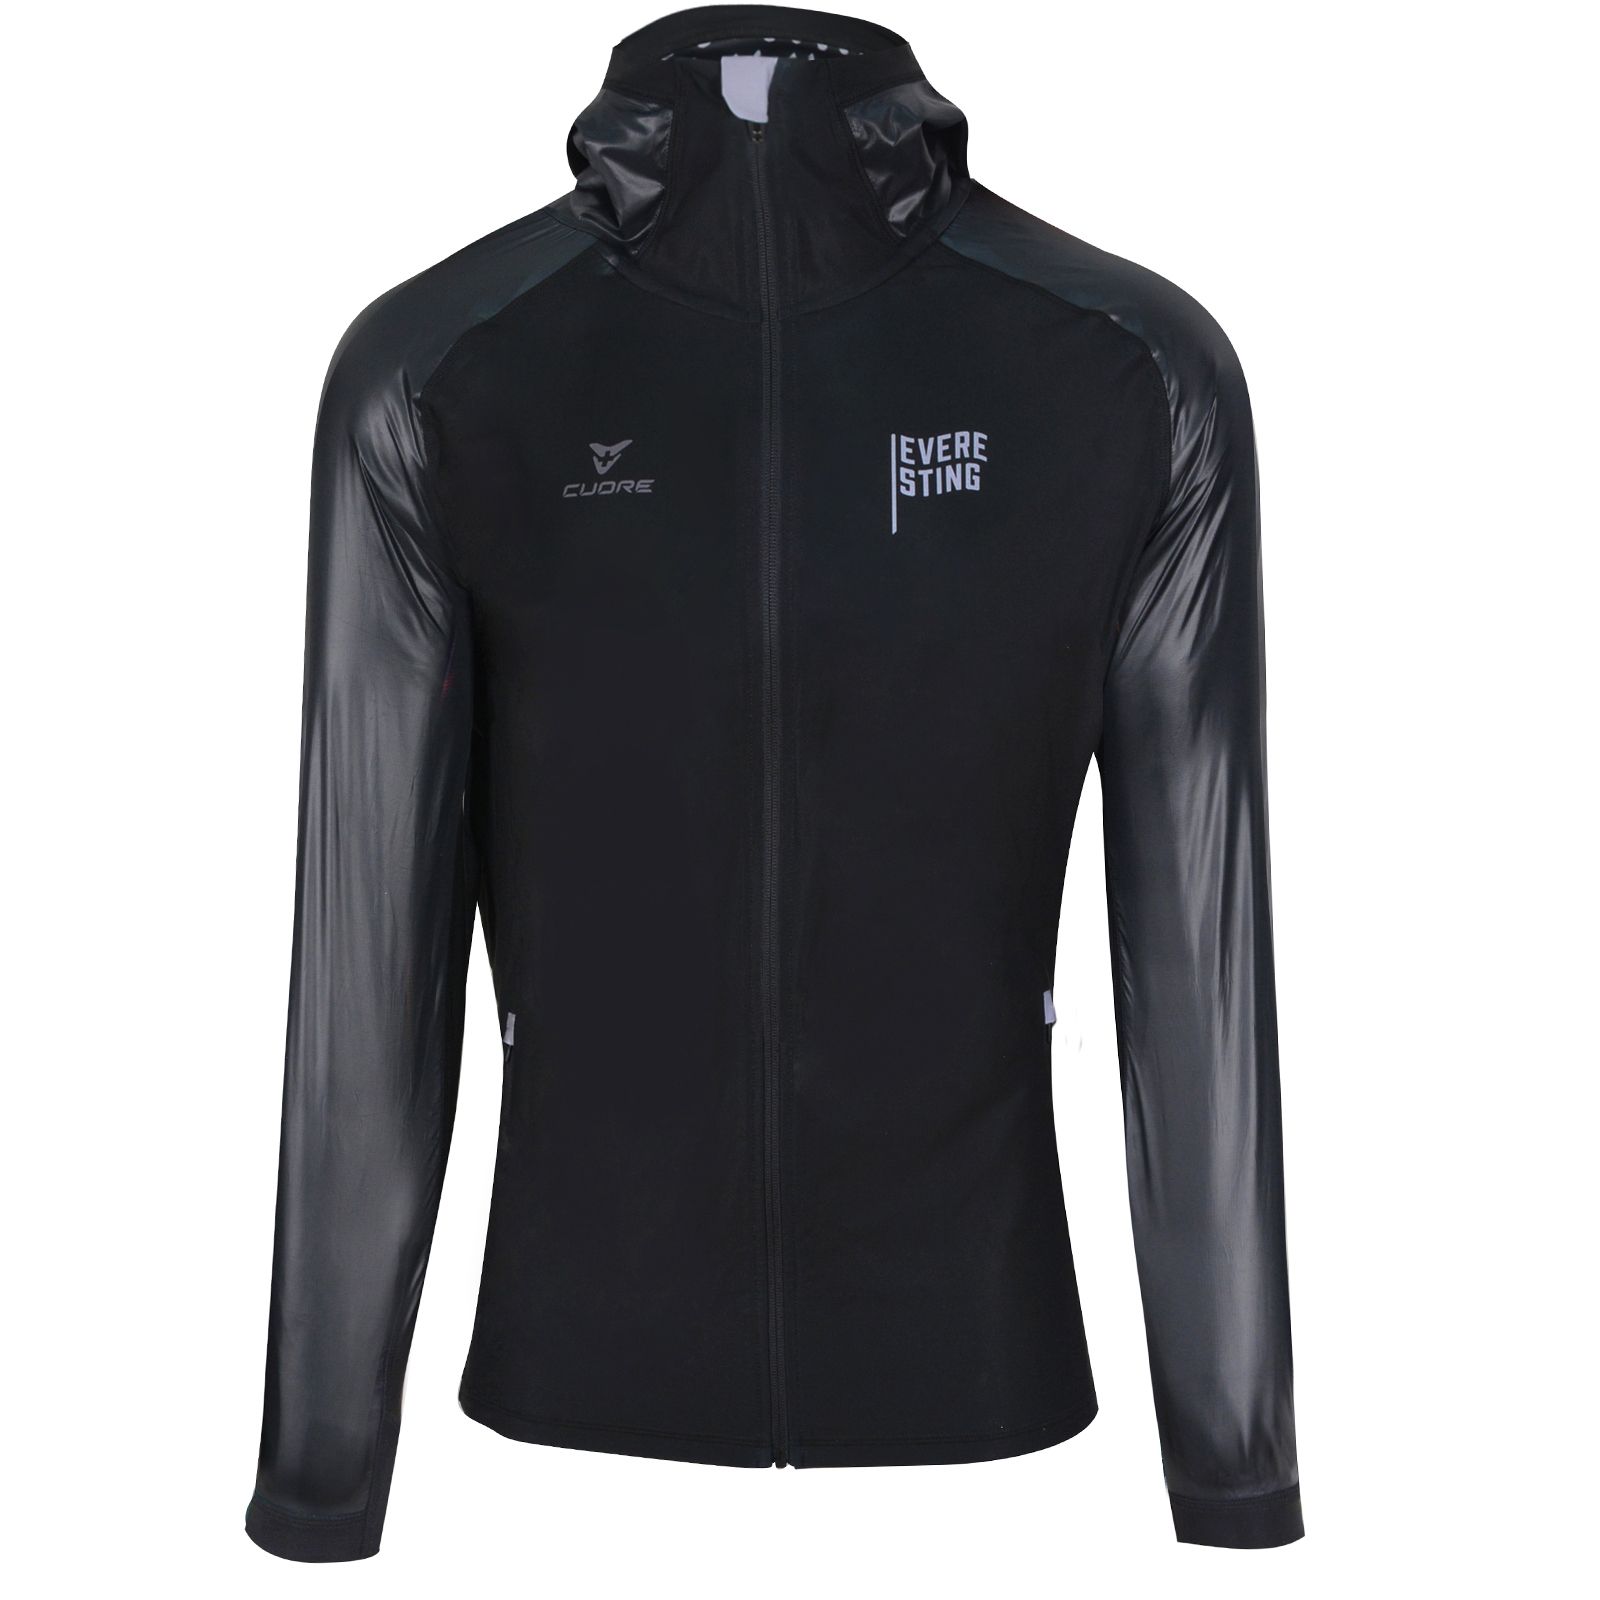 Image for Everesting Lifestyle Hoodie Men's